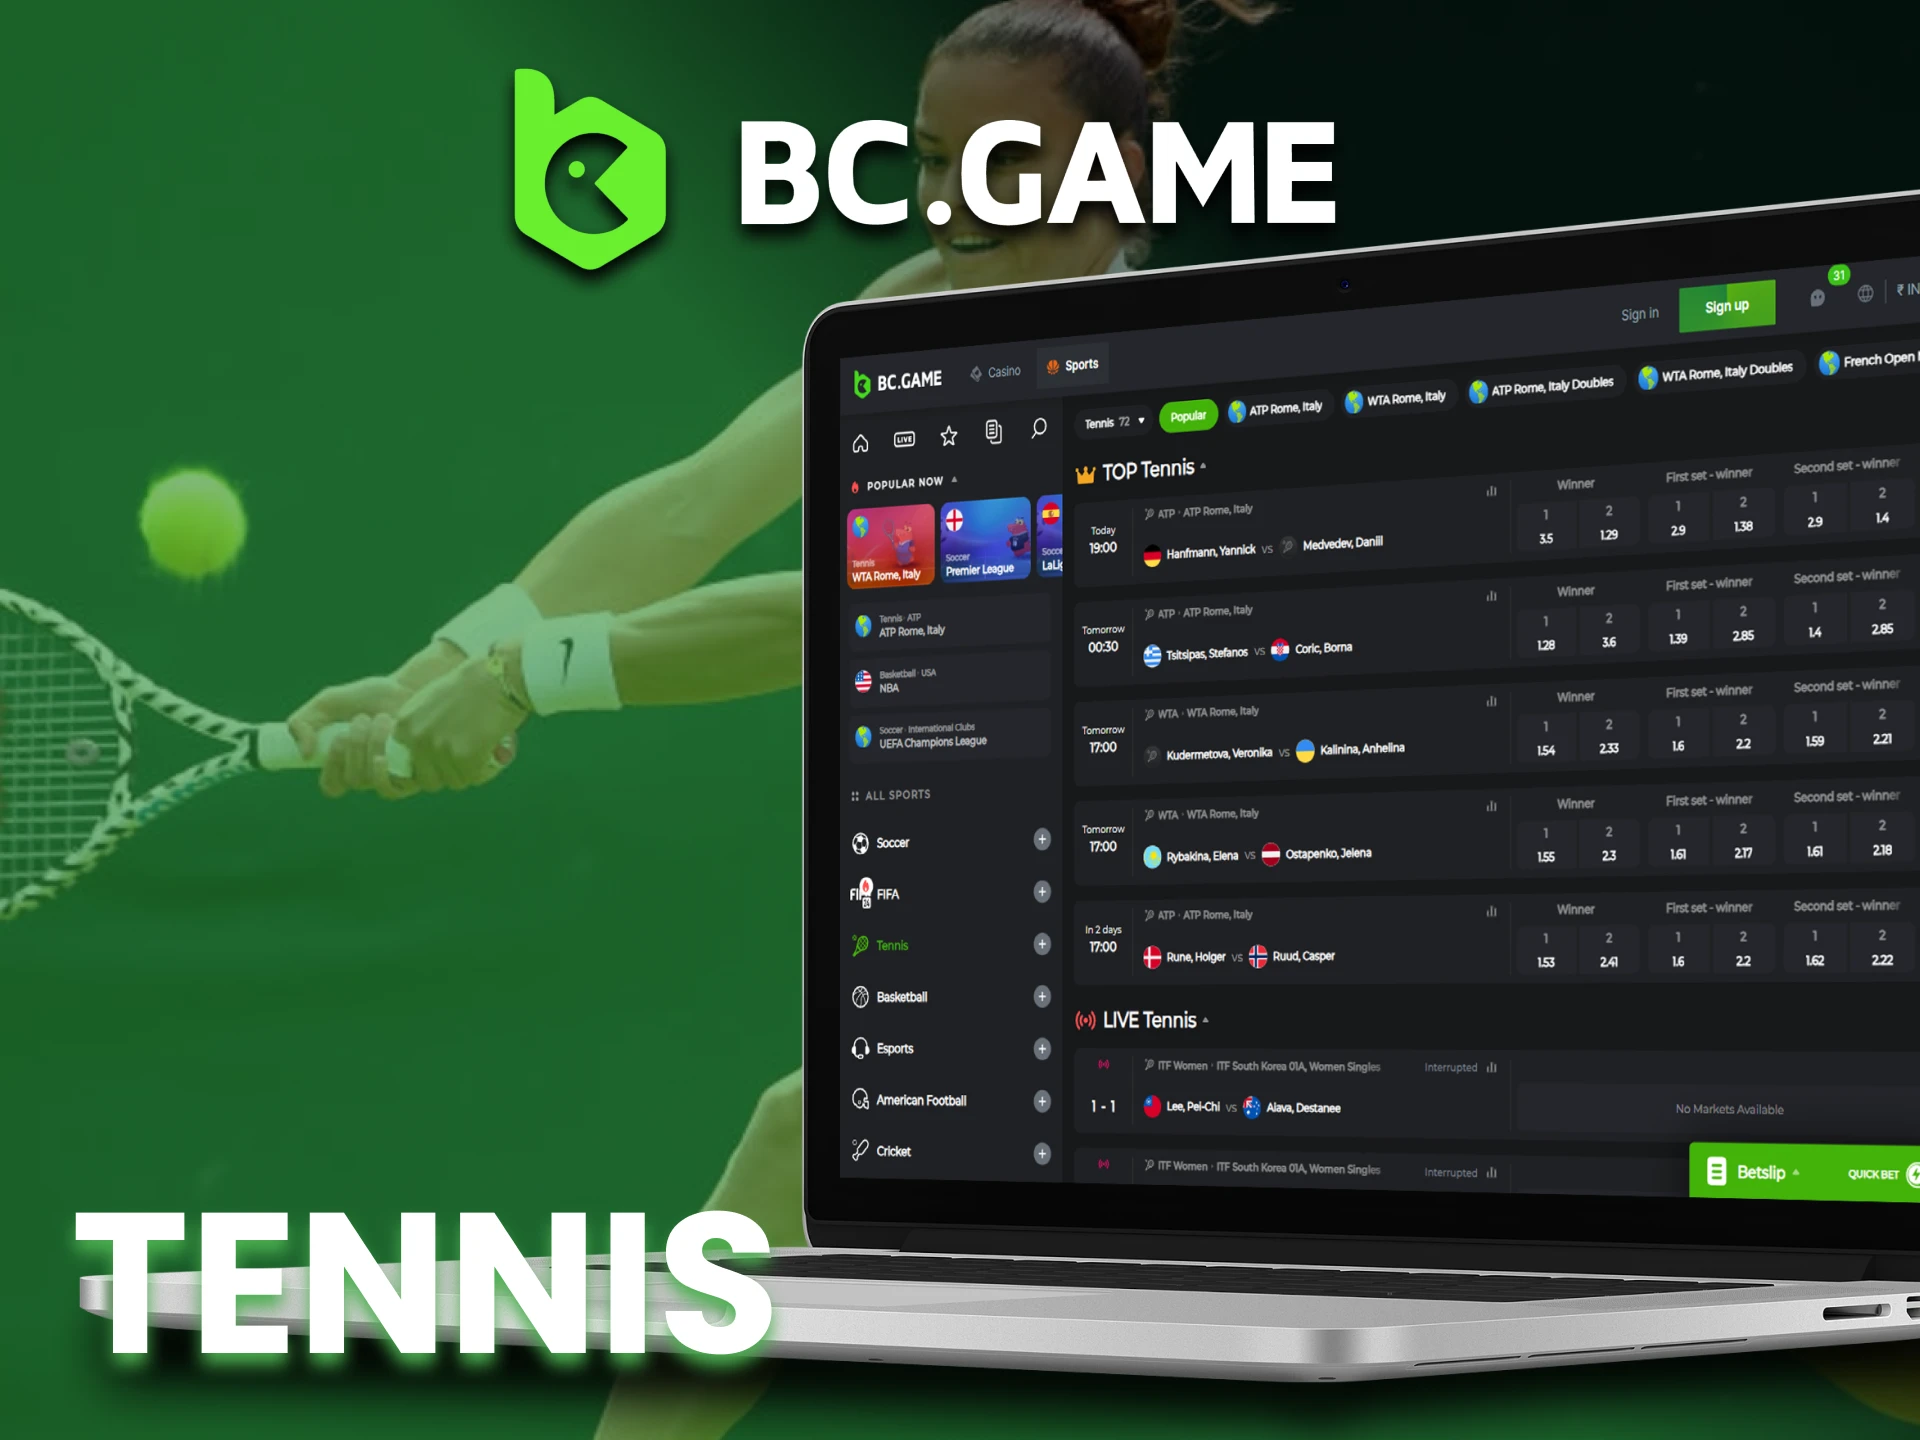 Watch tennis matches and bet at BC Game.